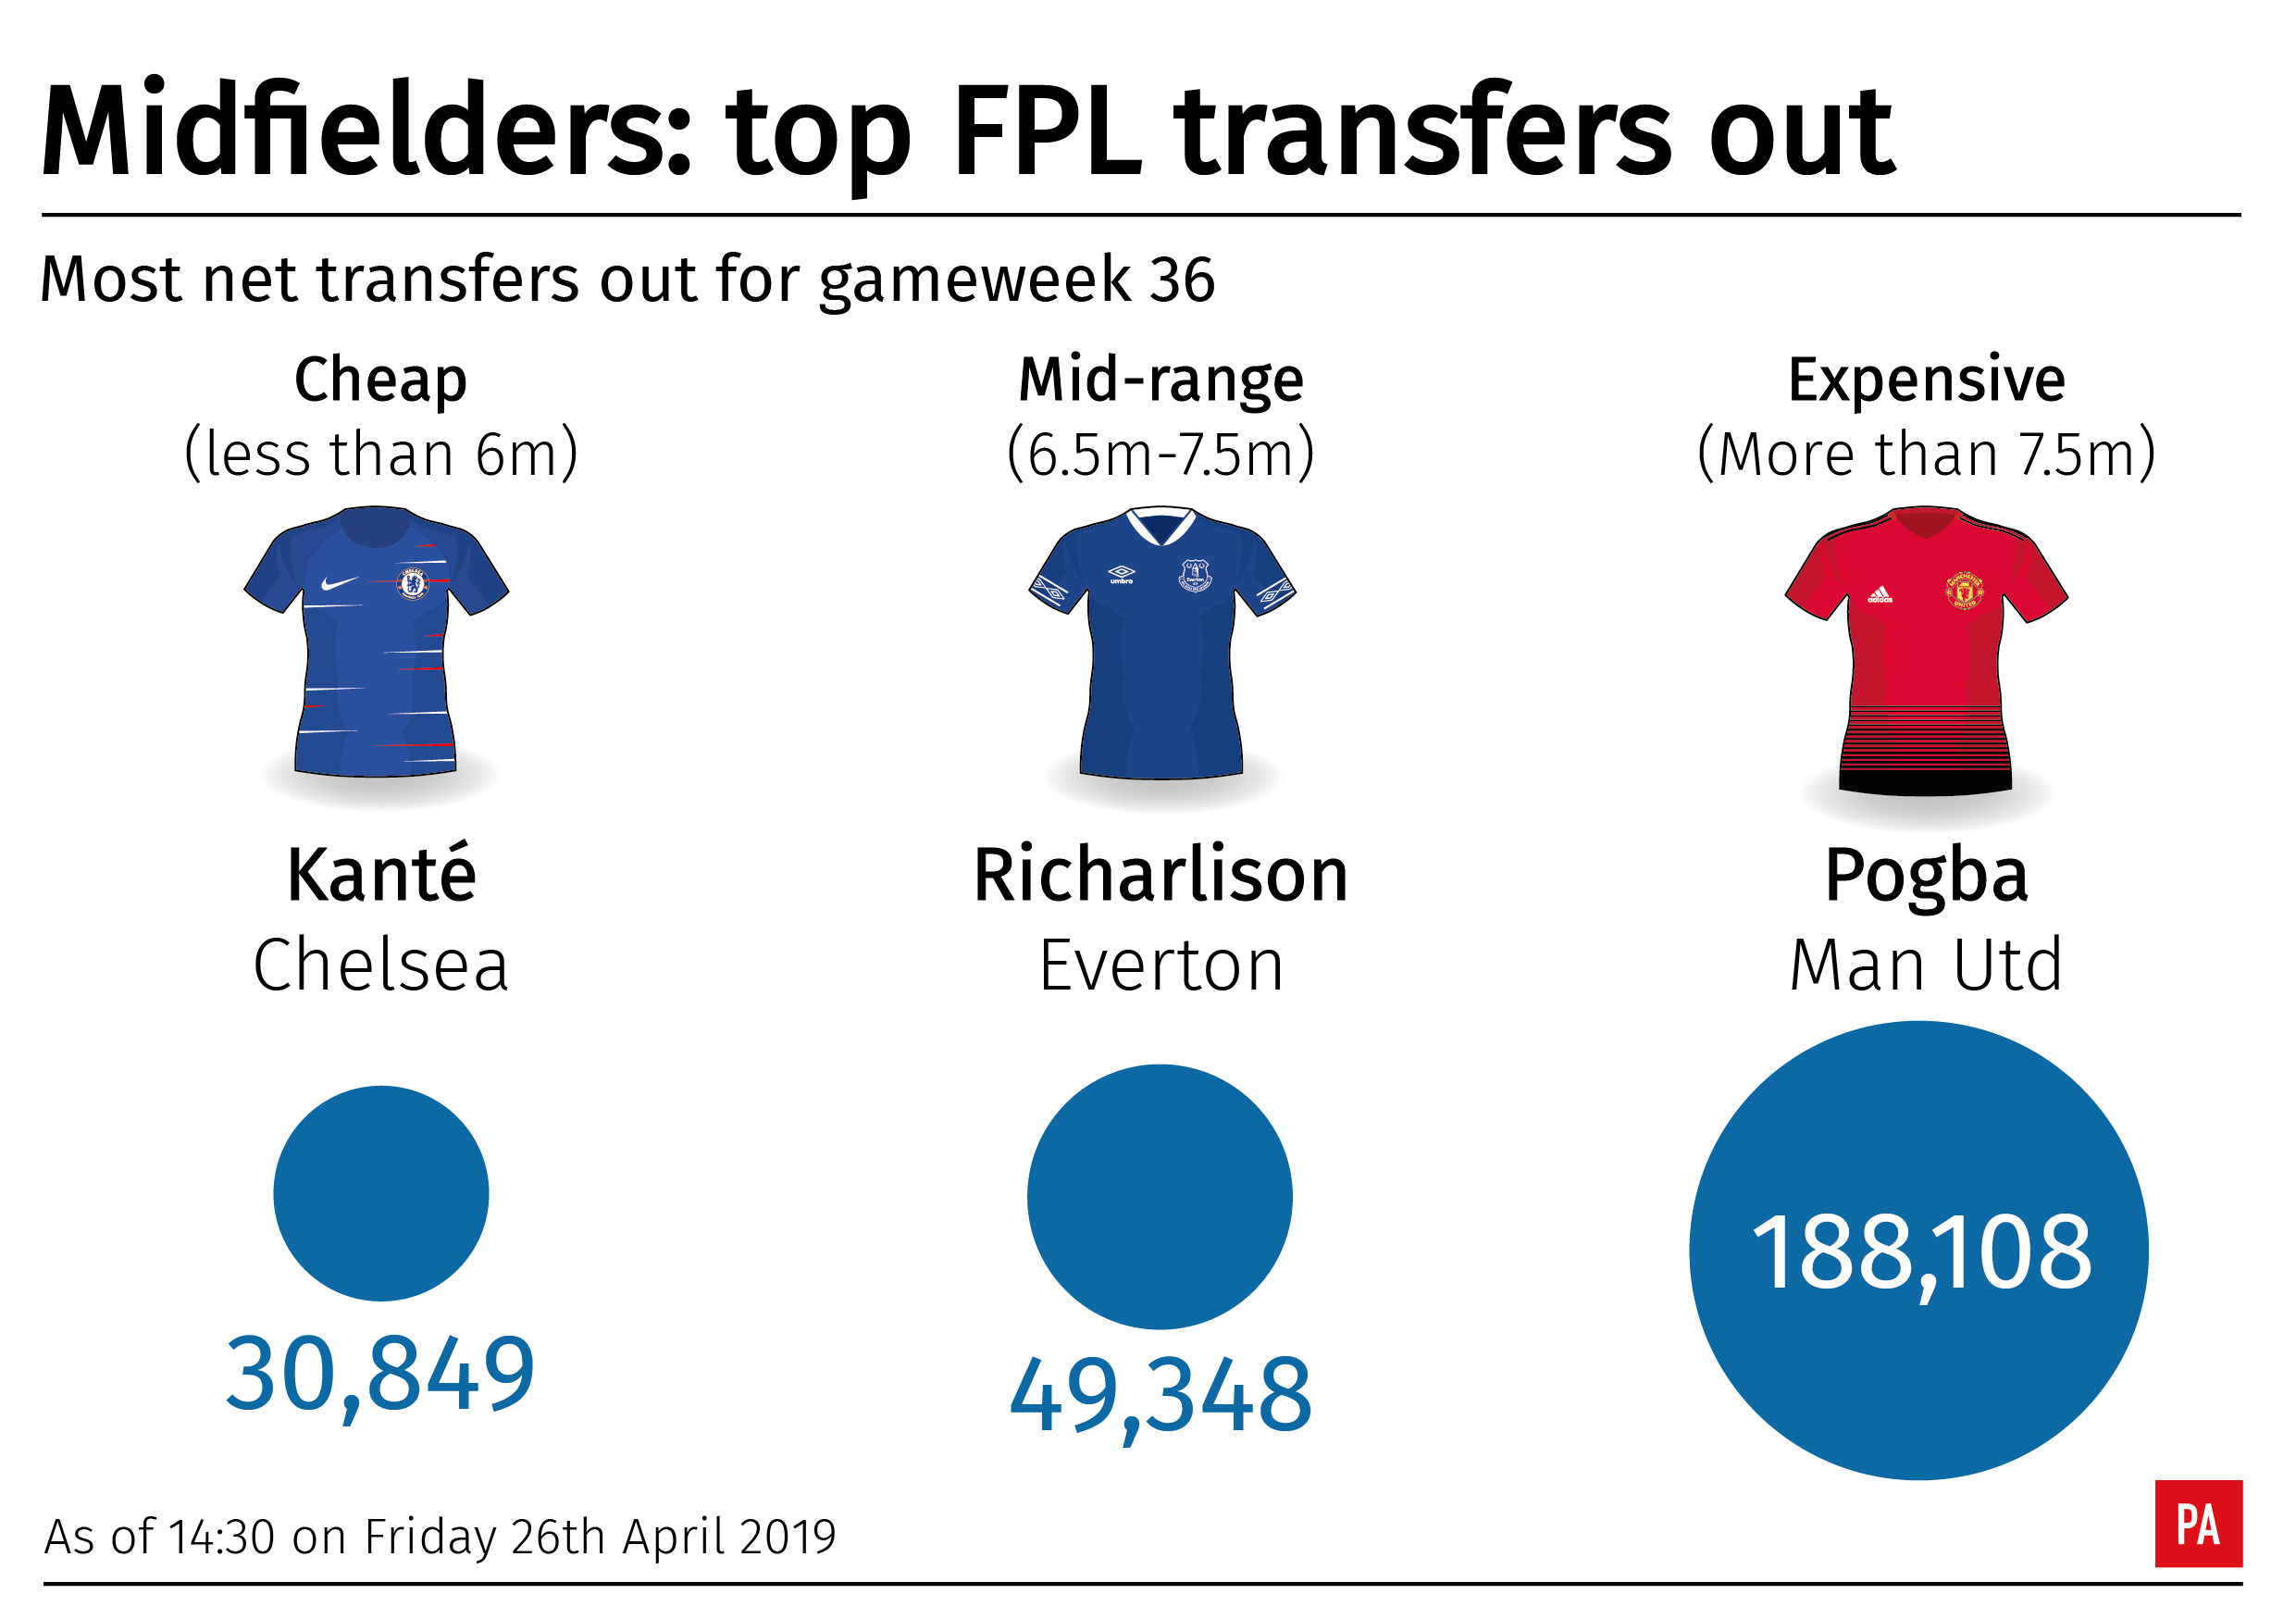 A graphic showing which midfielders are being sold in the Fantasy Premier League